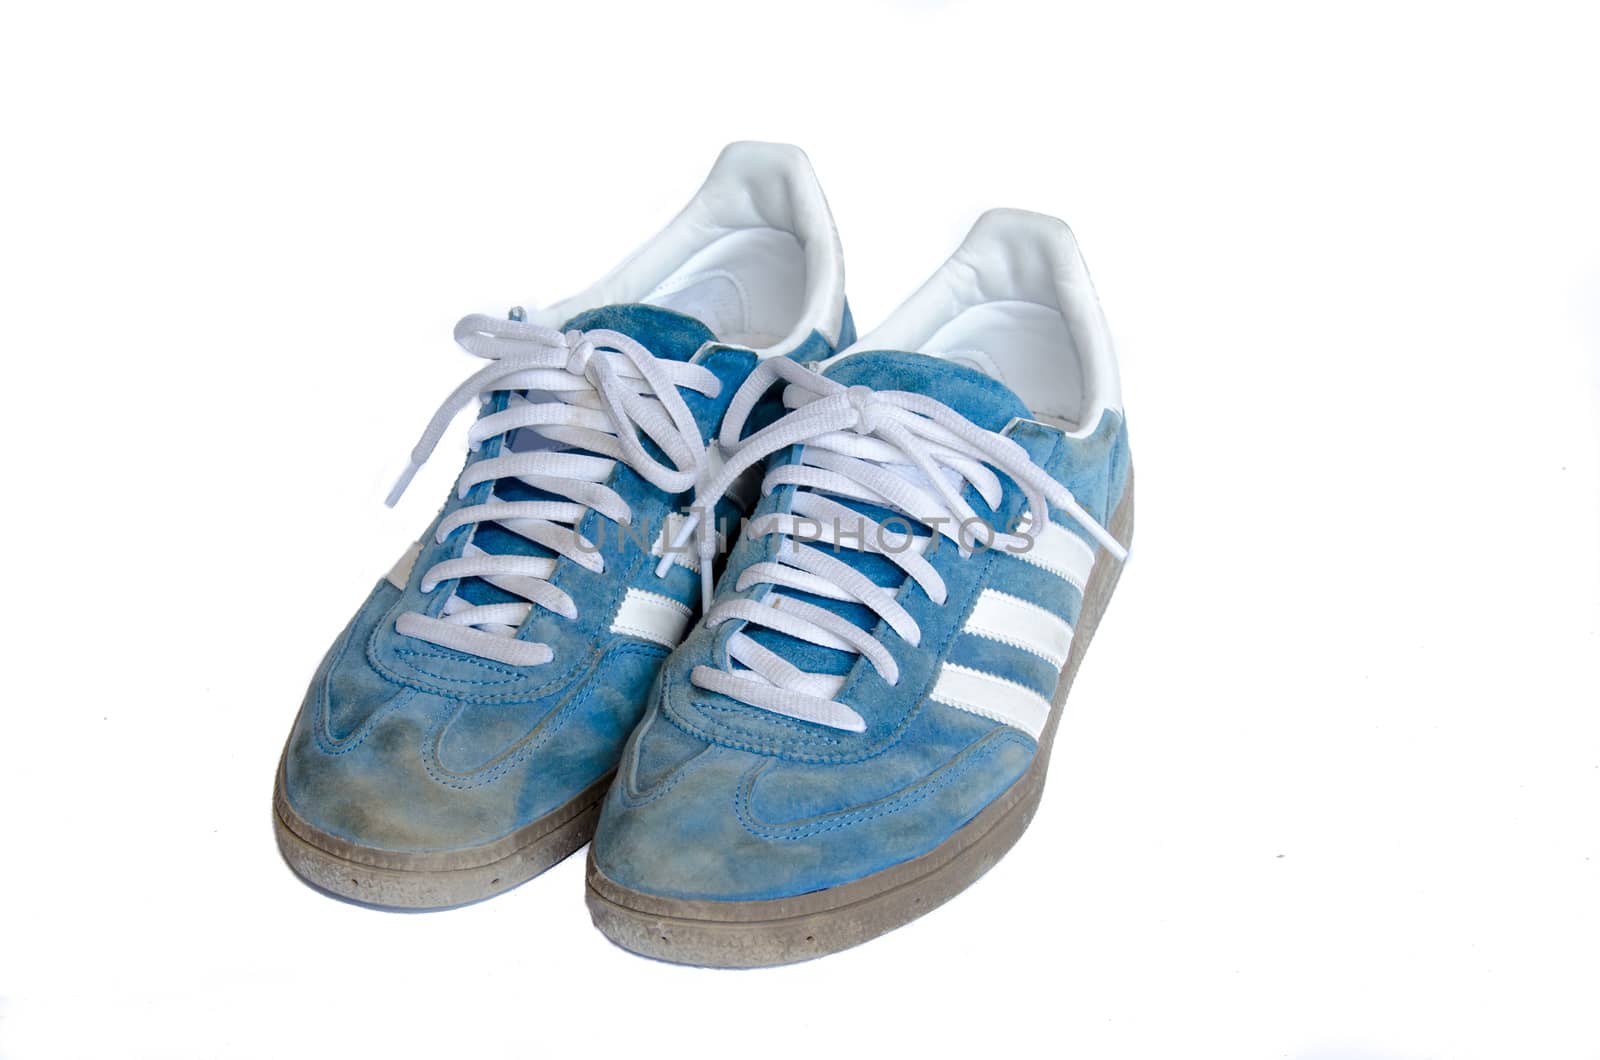 The Blue sneakers isolated on white background.